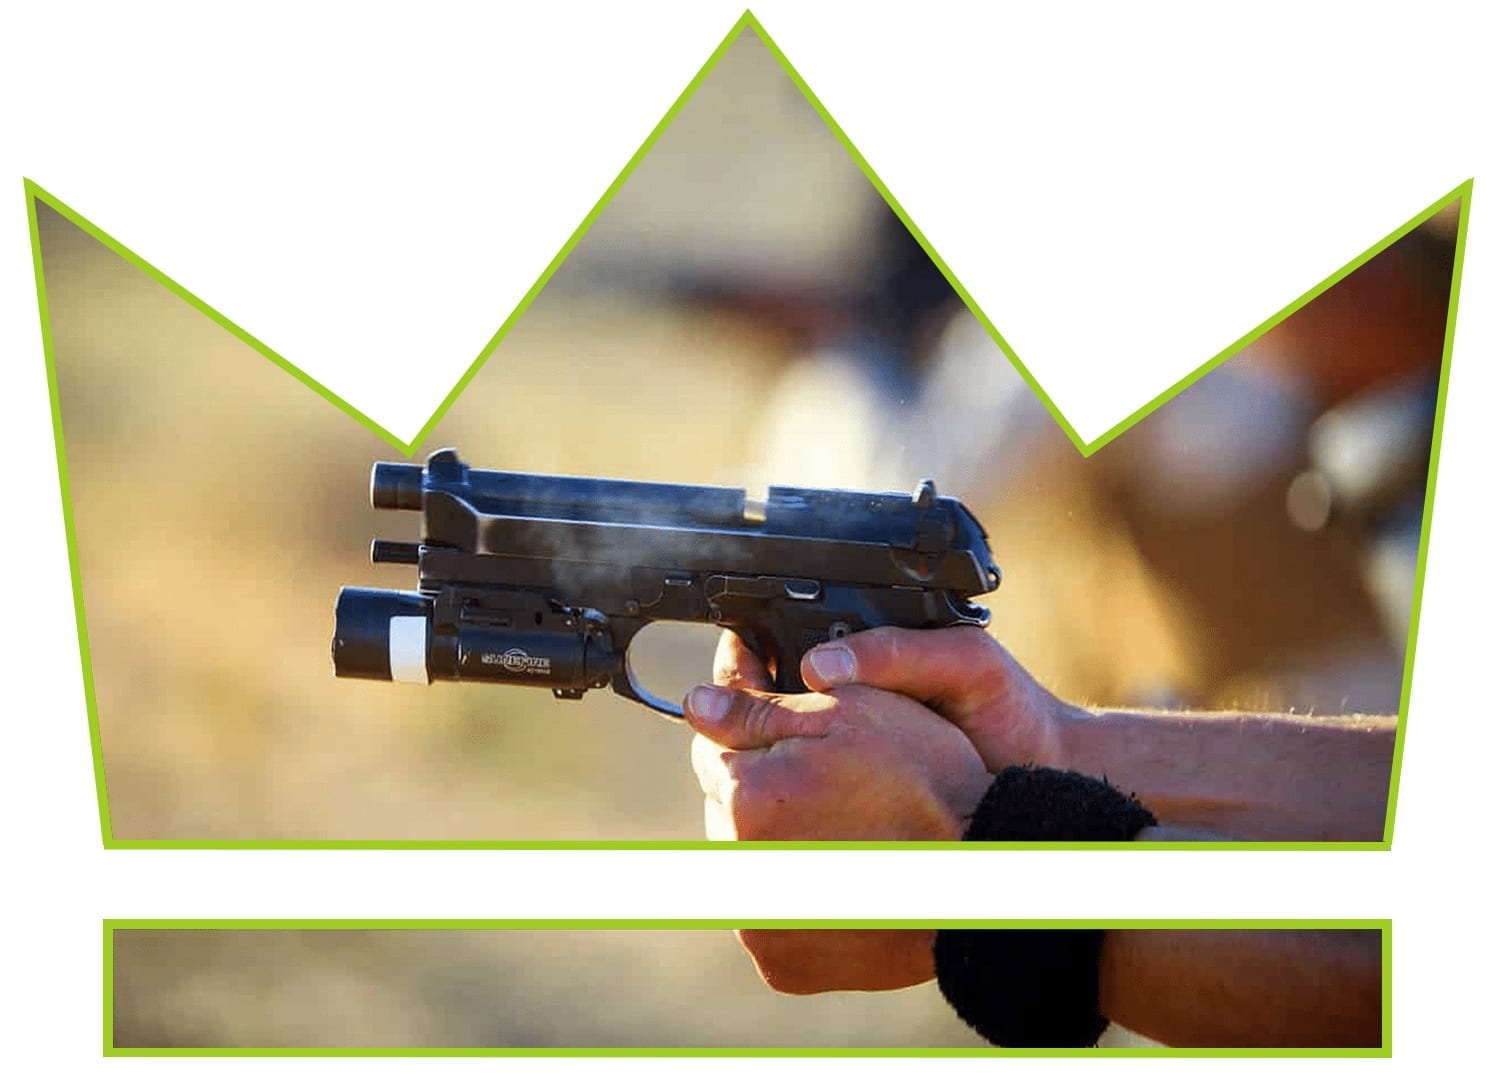 Having trouble keeping your firearms merchant account?